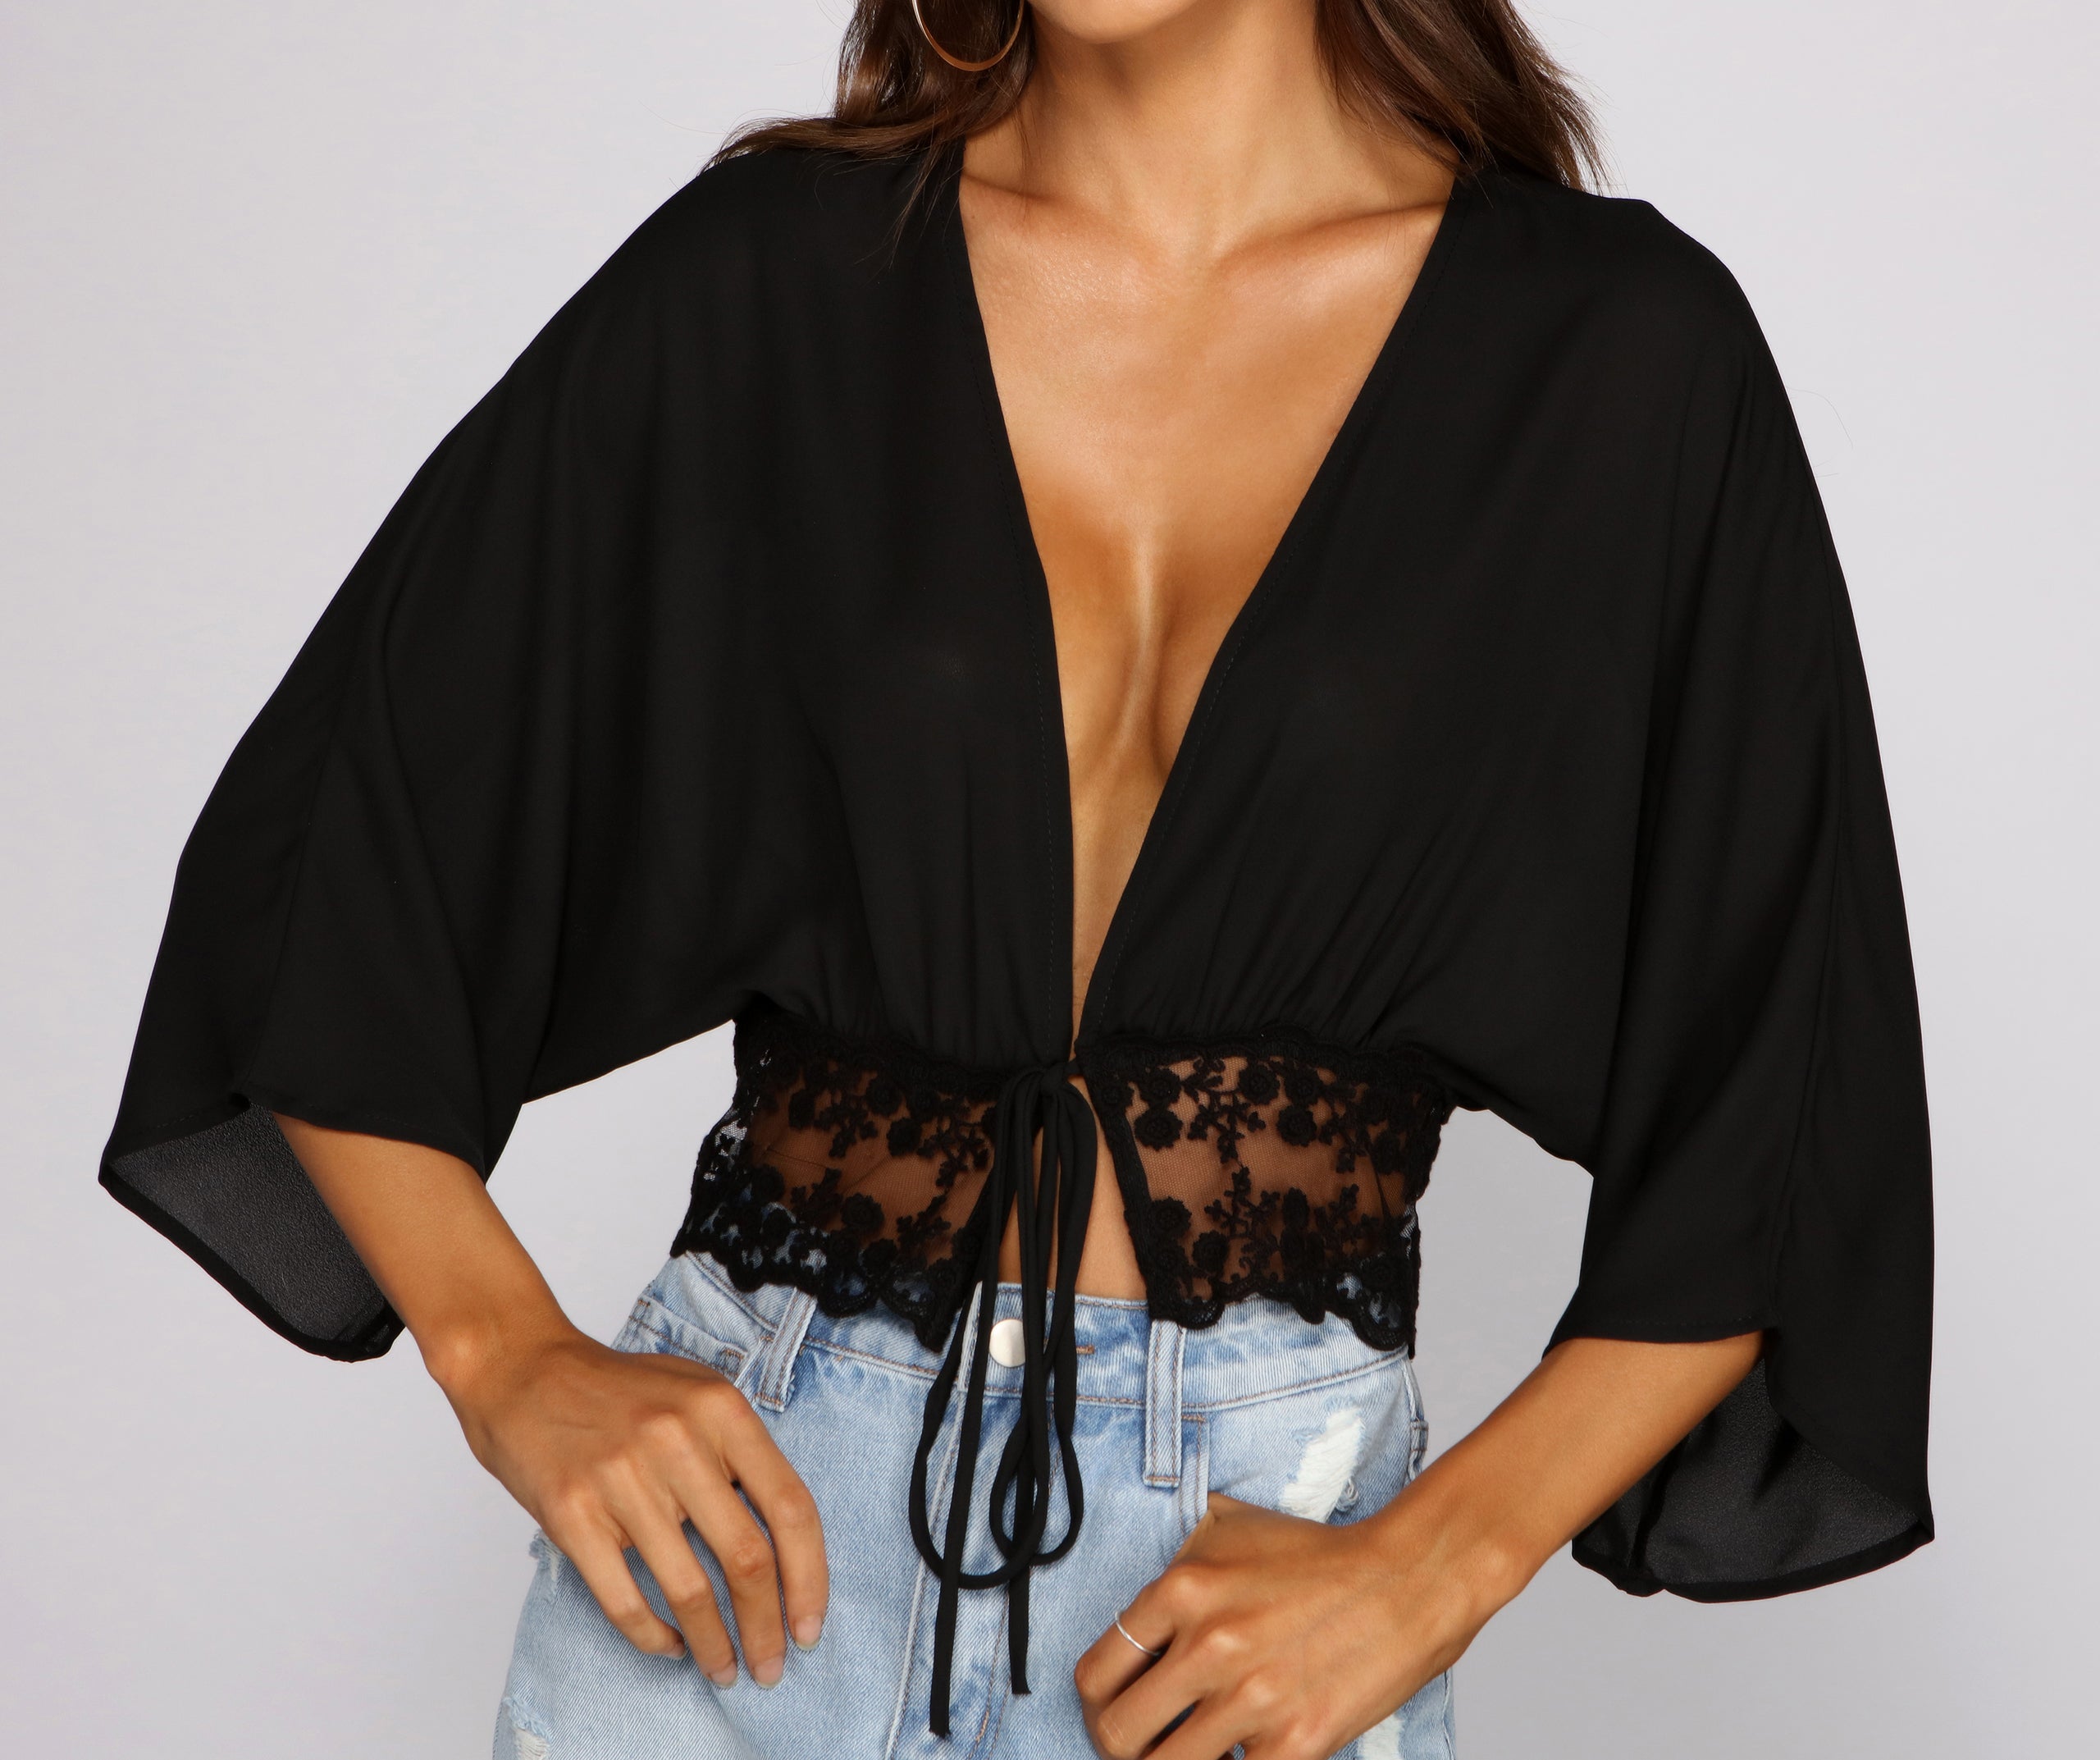 Dreamy And Chic Tie-Front Top